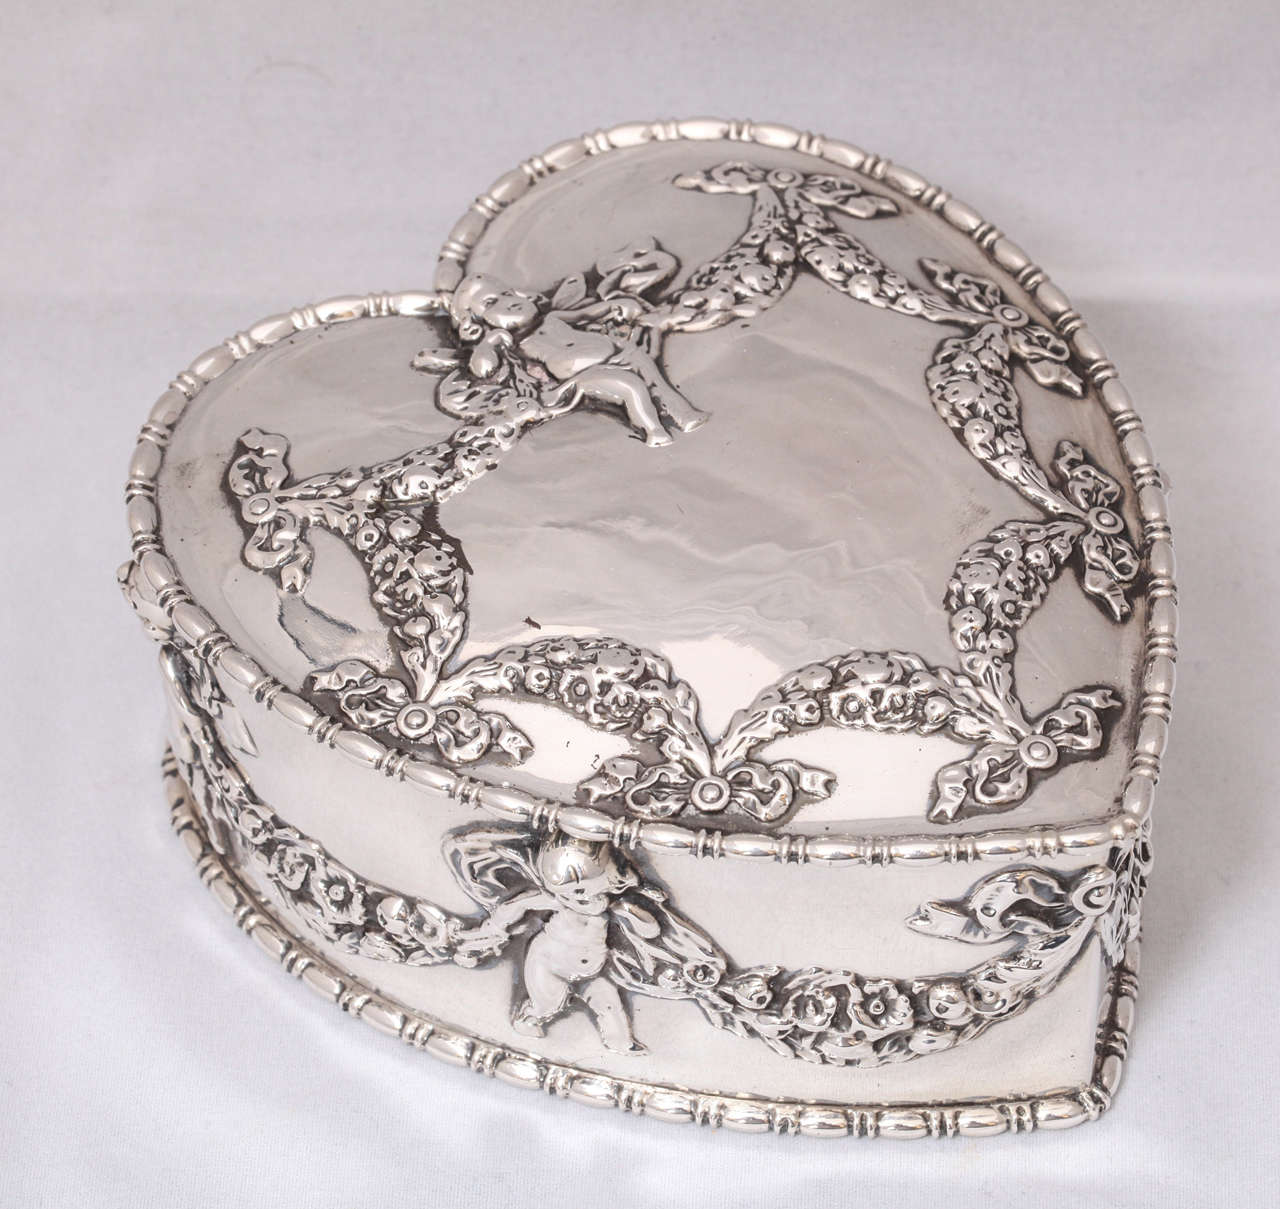 Beautiful, large, Victorian sterling silver, heart-form jewelry box (lined in burgundy velvet) with hinged lid, Howard & Co., New York, circa 1895. Decorated with cherubs, swags, ribbons and bows. No monogram. Measures: 4 1/4